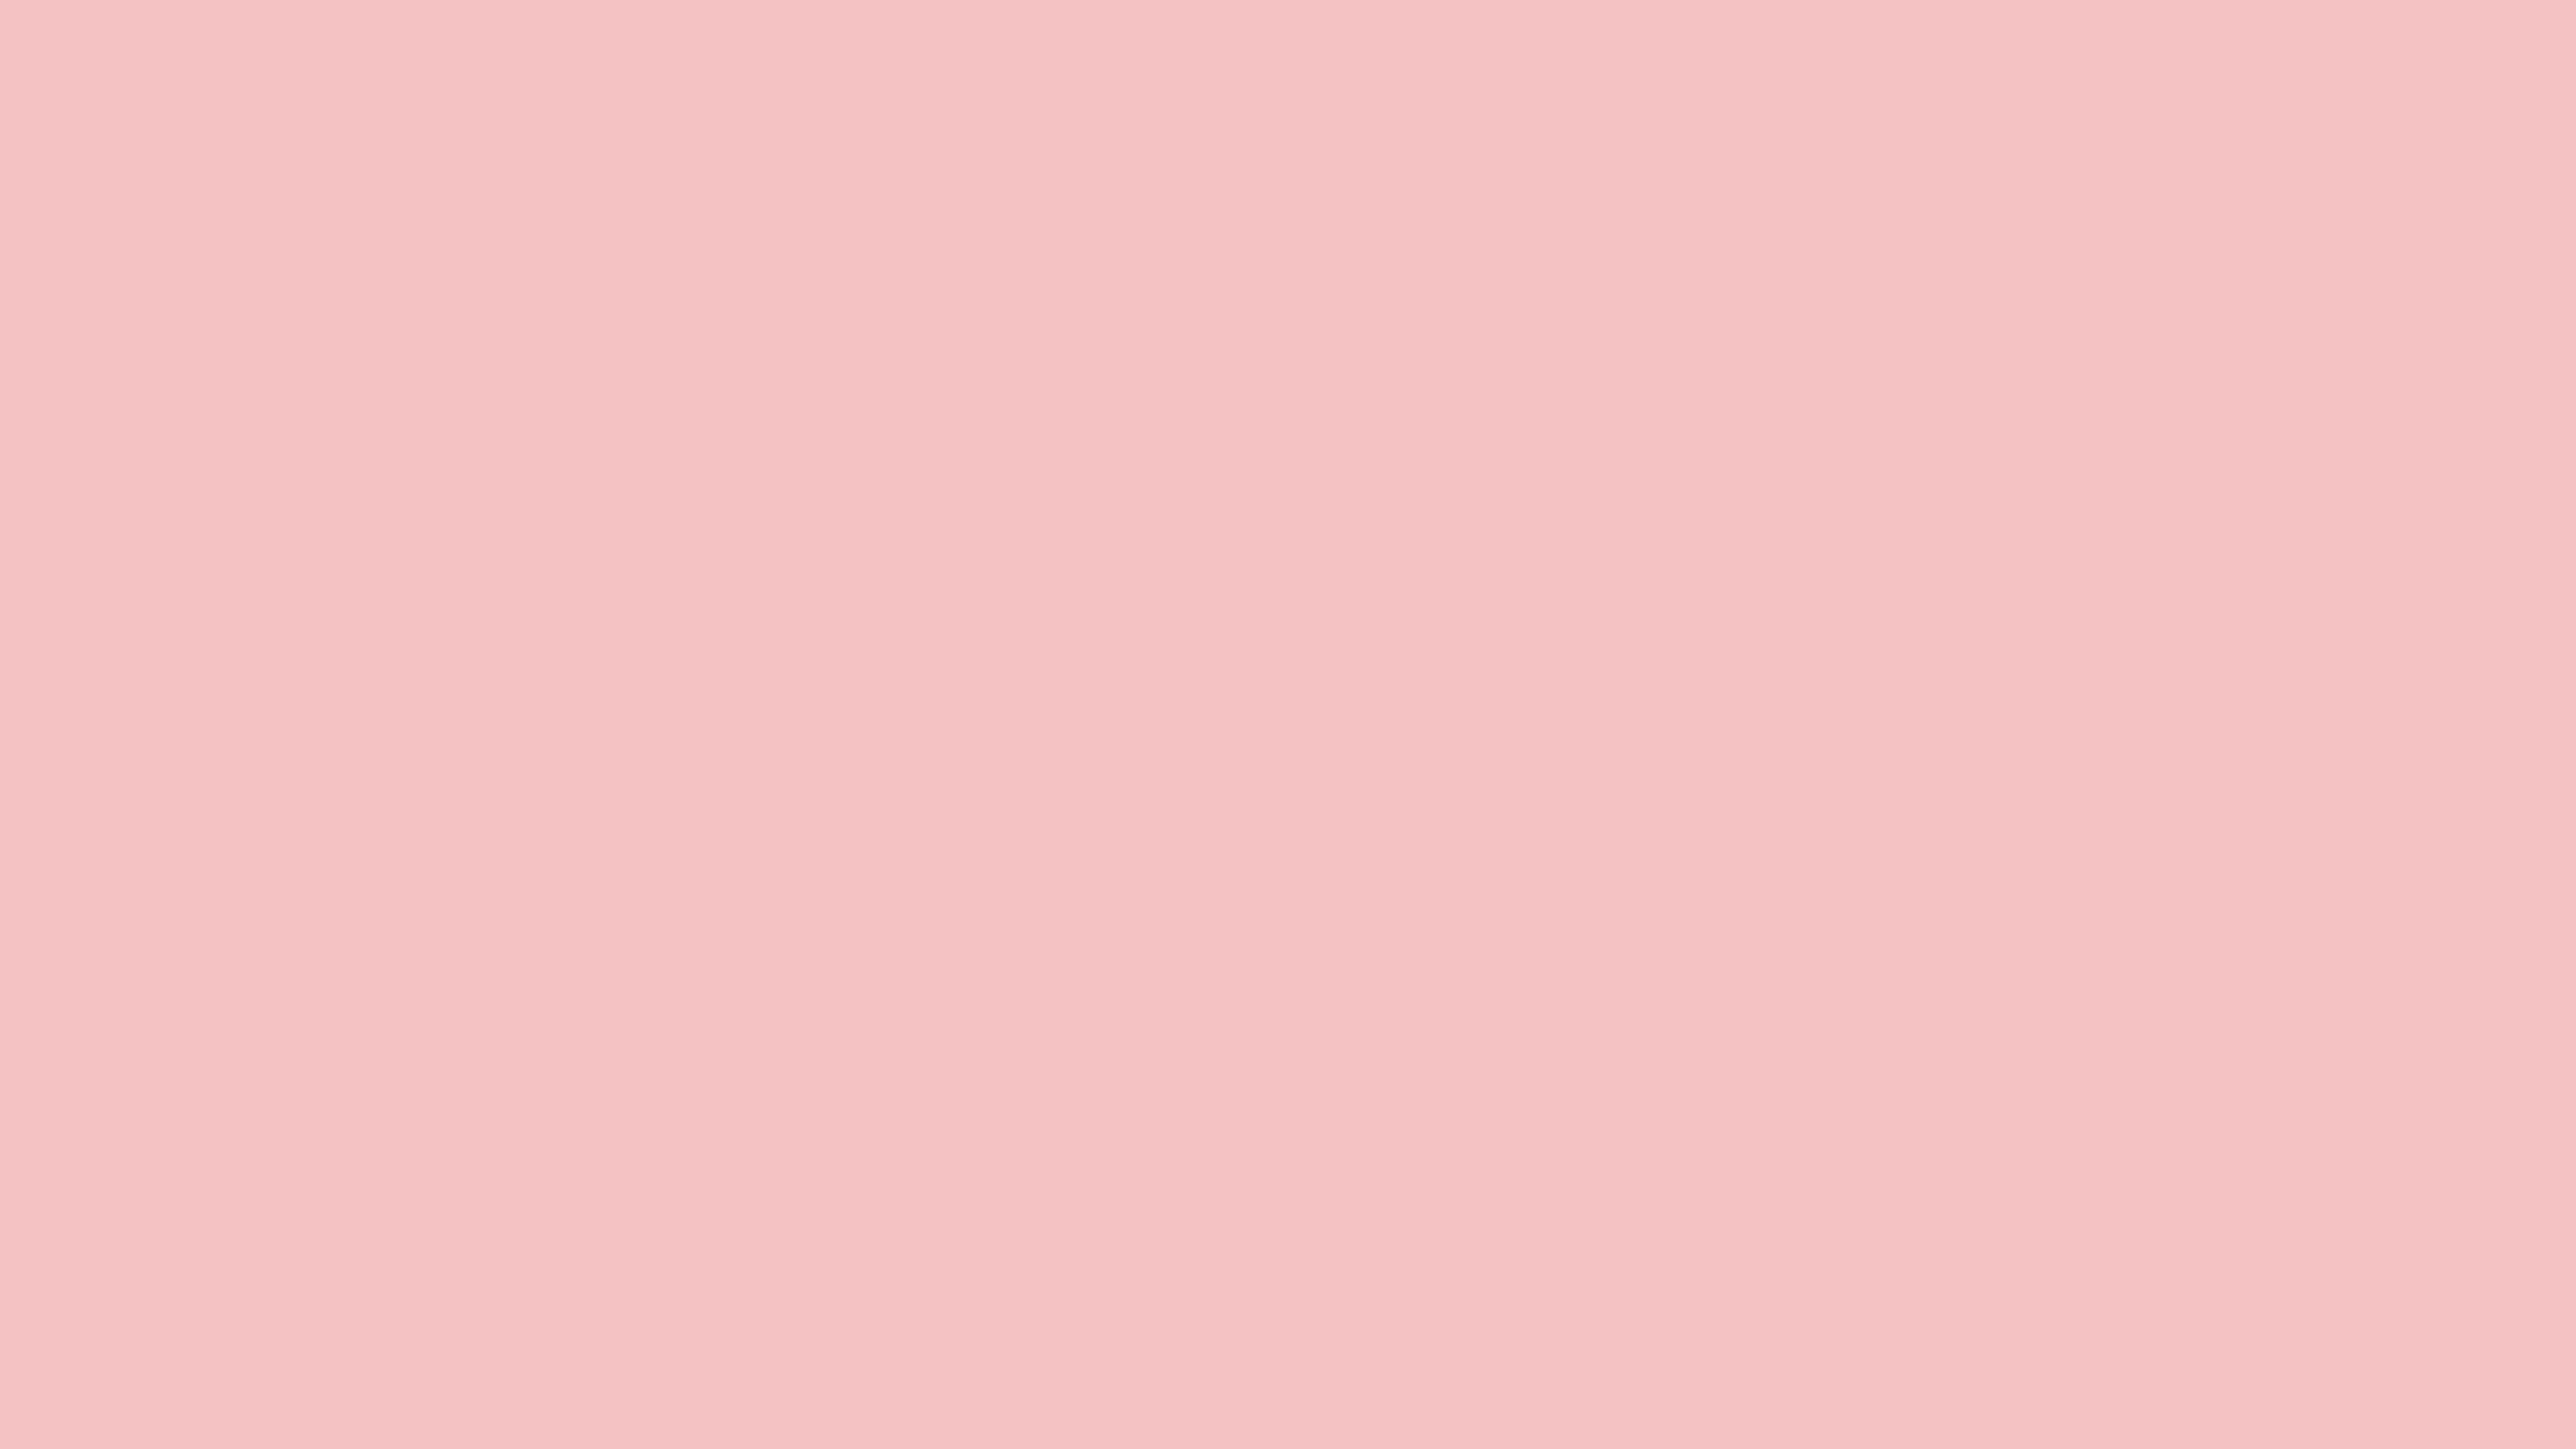 4096x2304 Baby Pink Solid Color Background